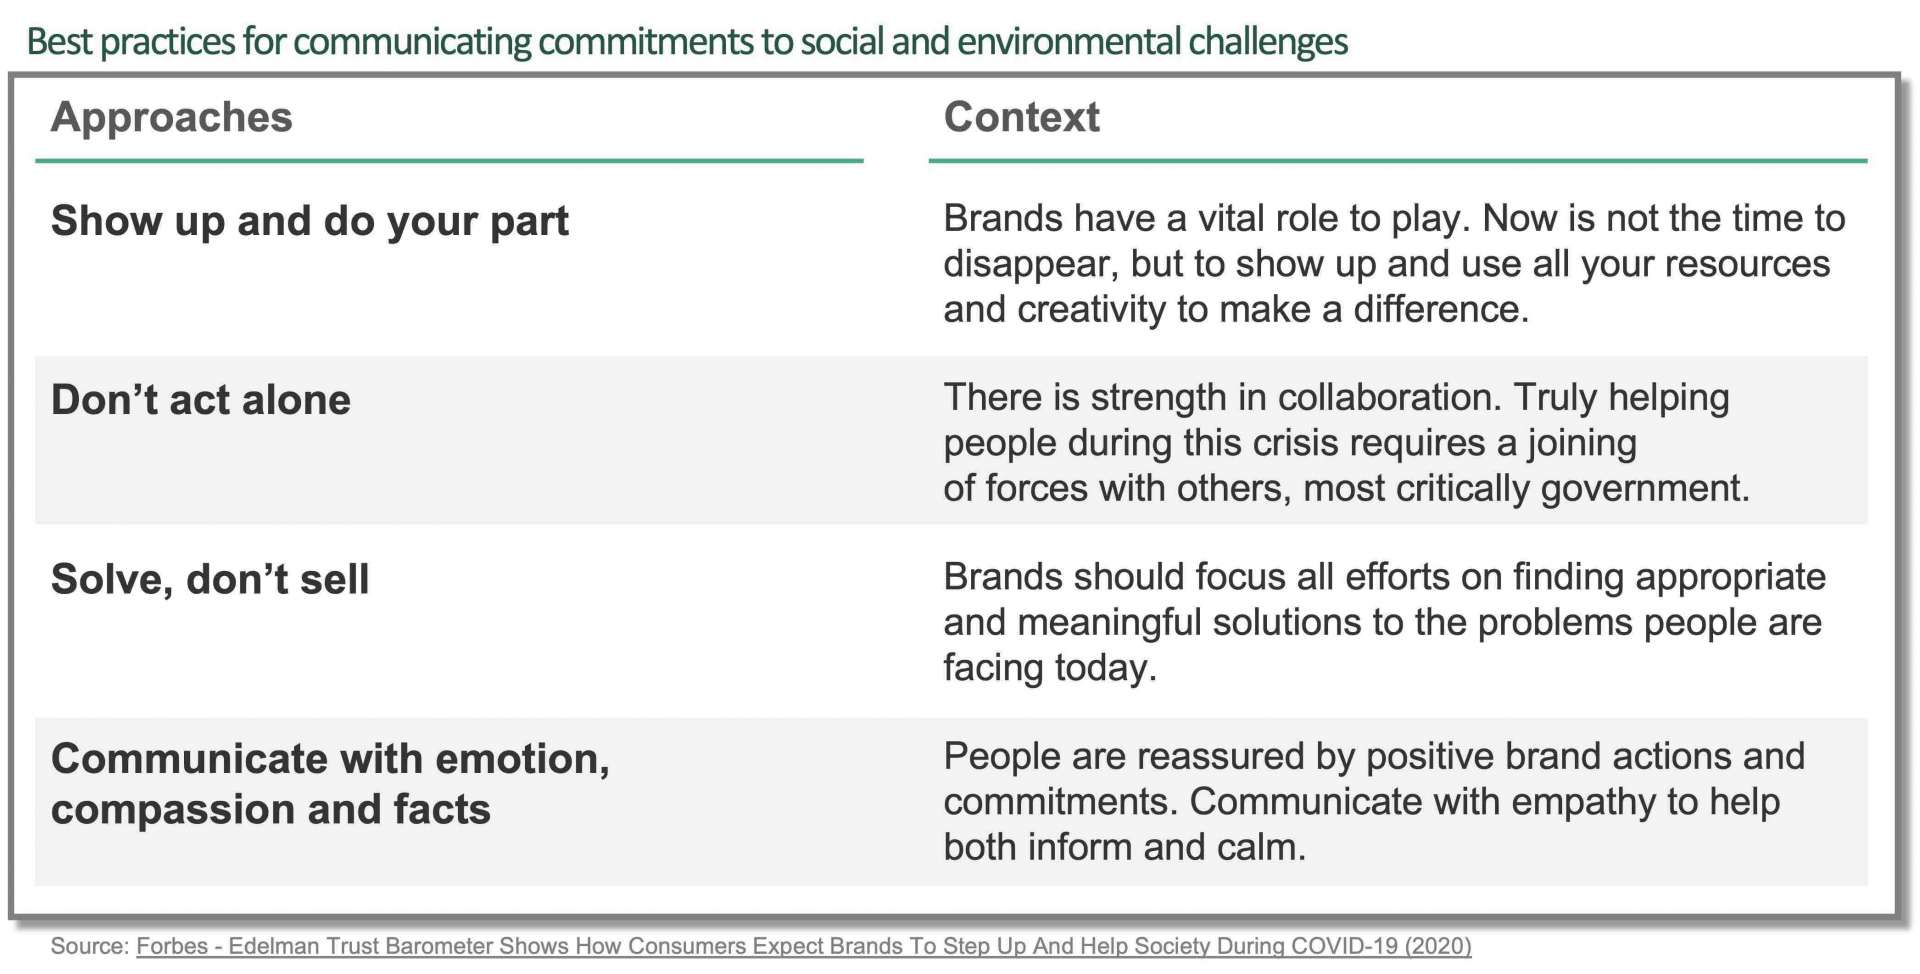 Best practices for communicating commitments to social and environmental challenges